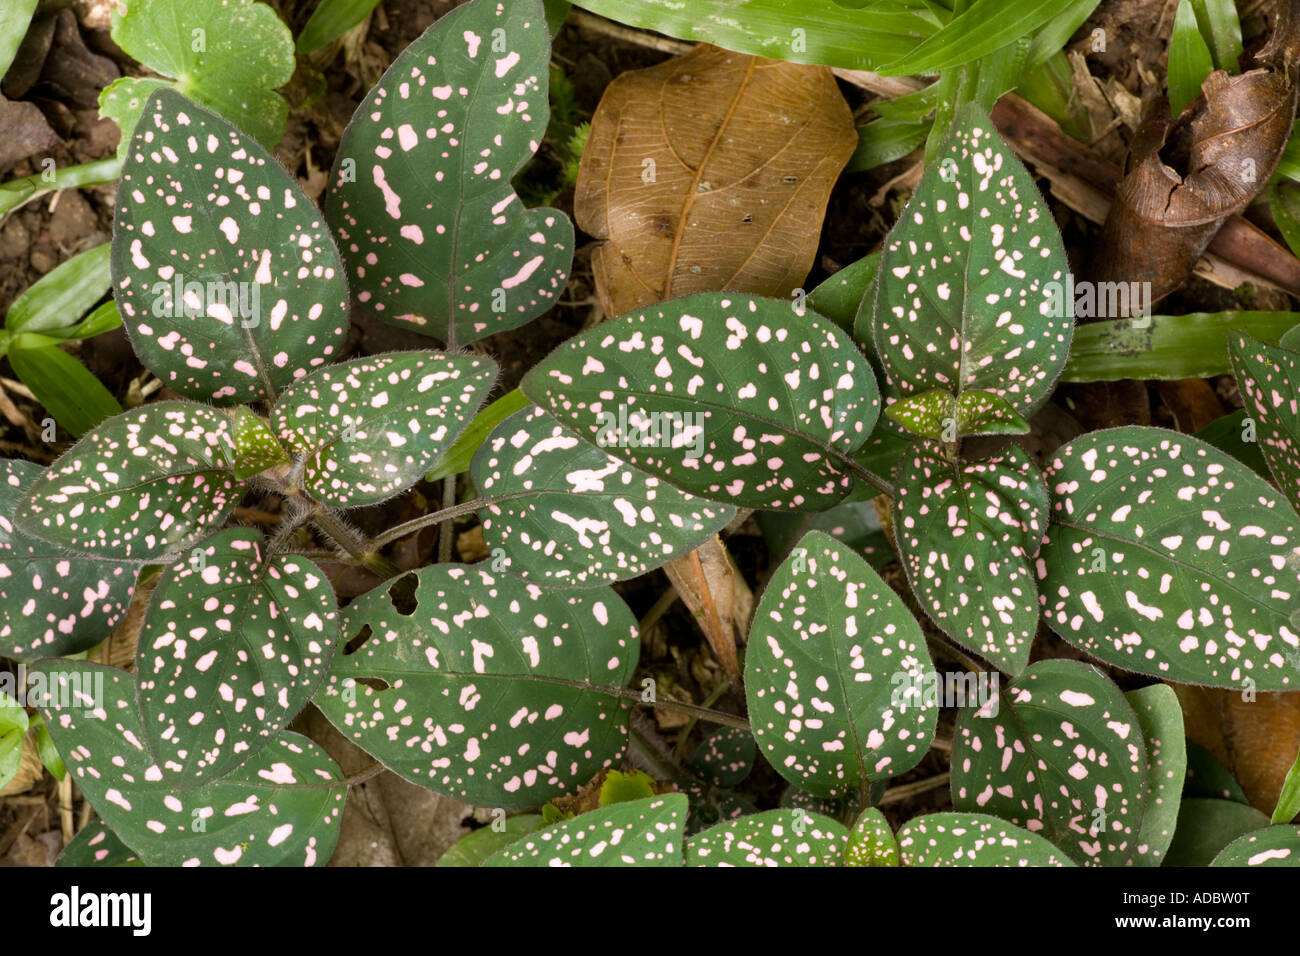 Polka Dot Plant or freckle face (Hypoestes phyllostachya) close-up Stock Photo